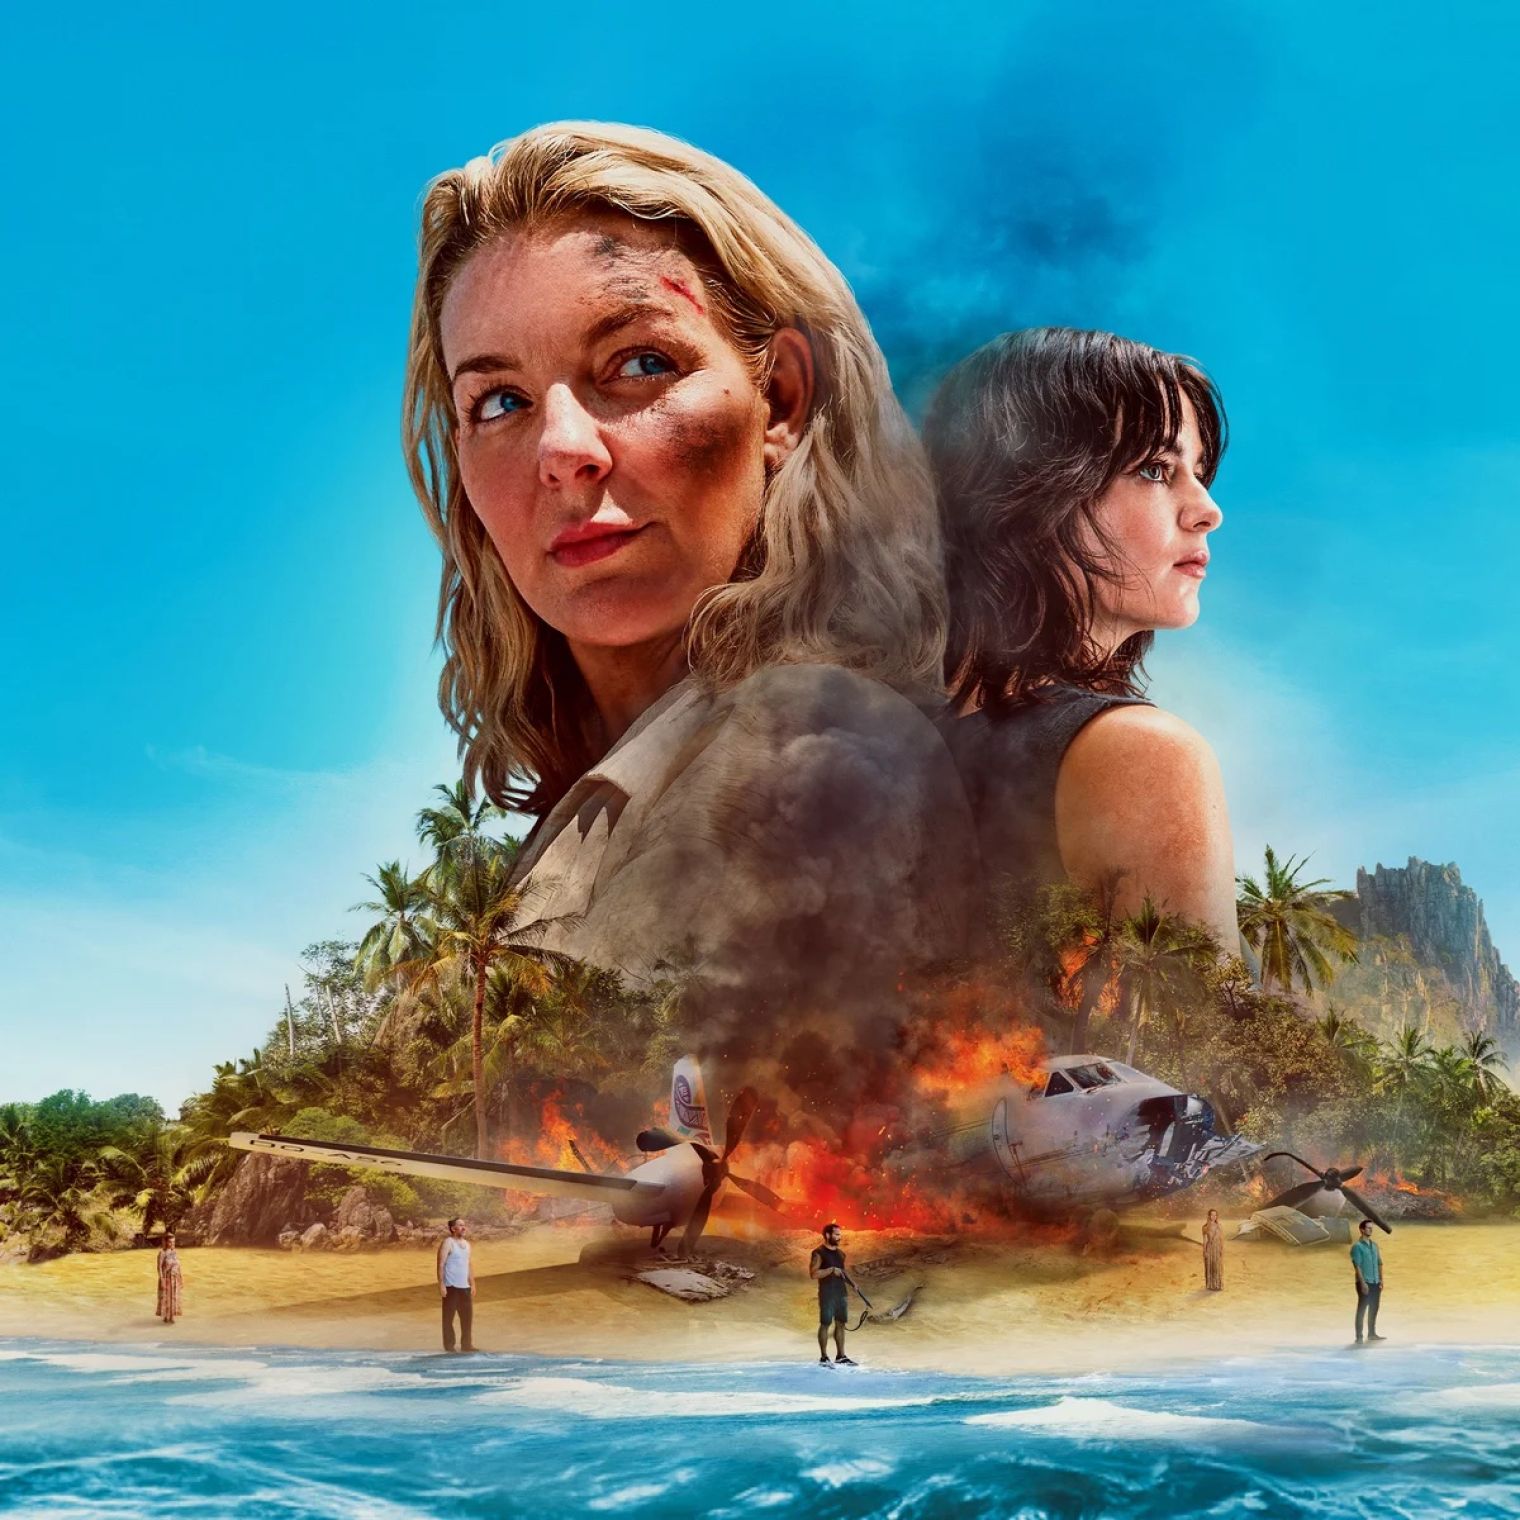 Céline Buckens stars in The Castaways which is available to stream on Paramount Plus from today